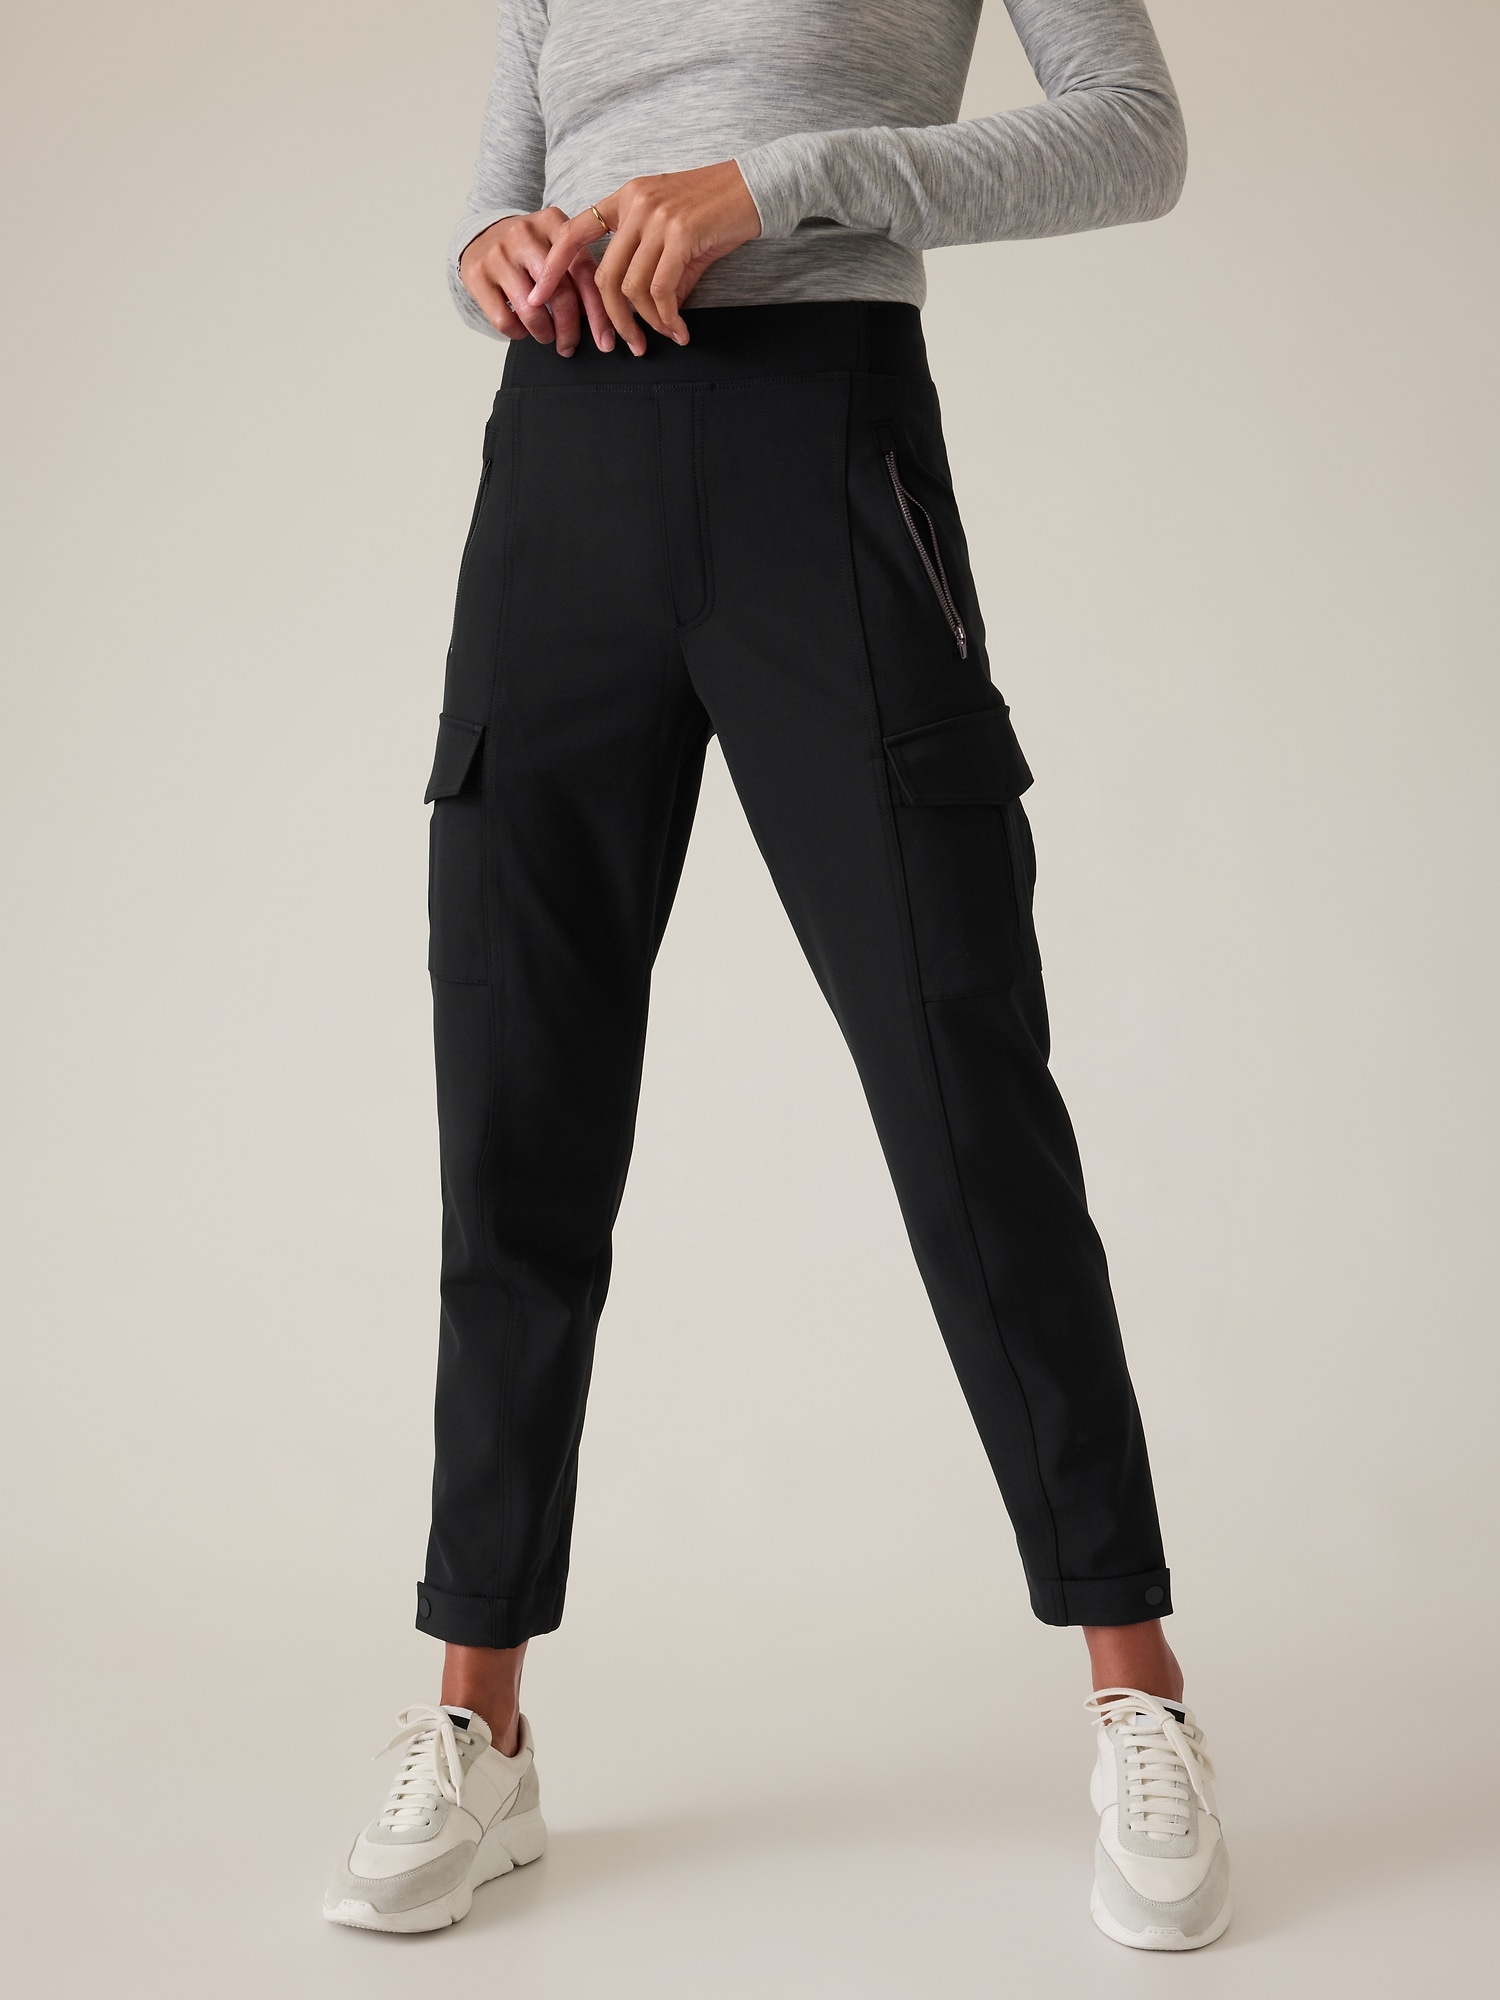 Tall Women's Joggers, Tall Tracksuit Bottoms